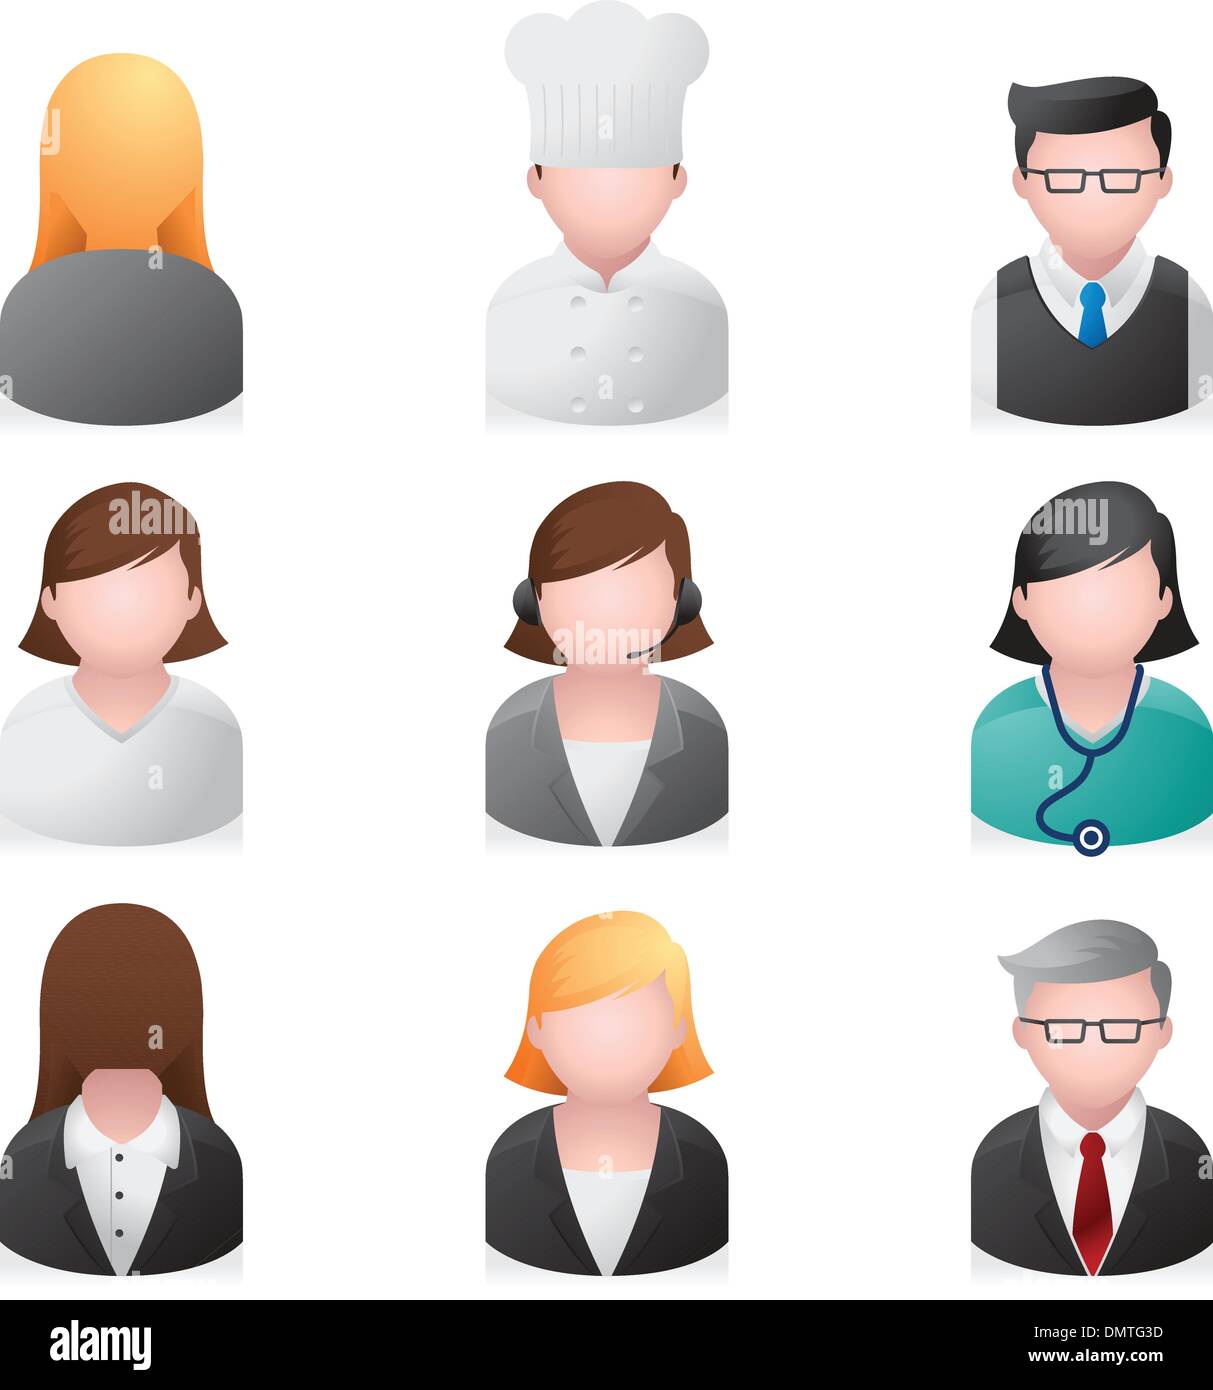 Web Icons - Professional People Stock Vector